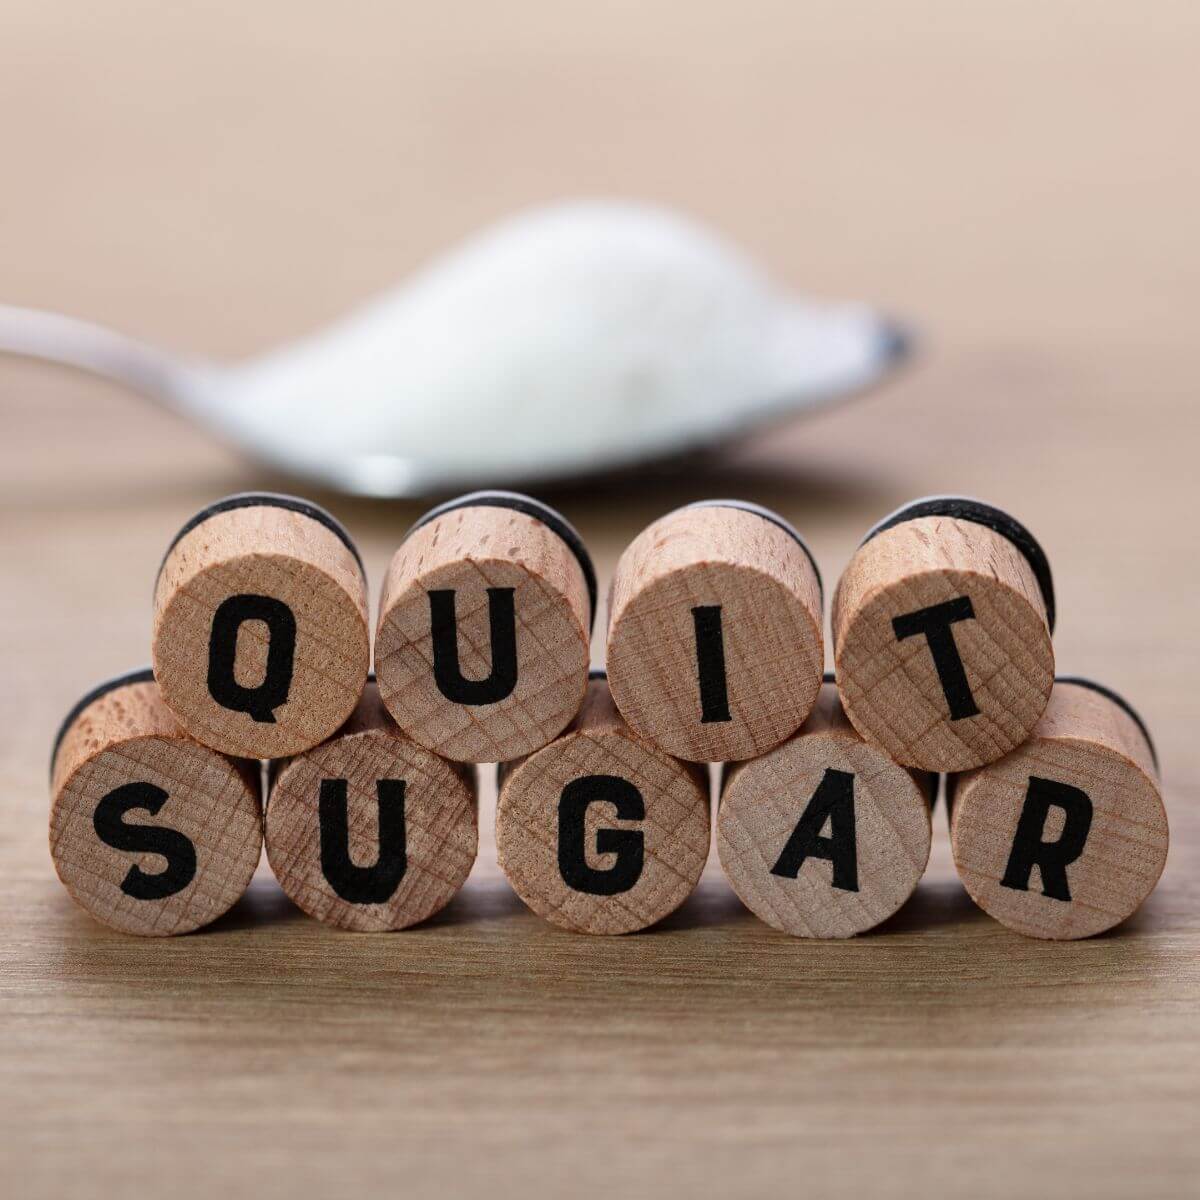 How to Quit Sugar and Benefit Your Health